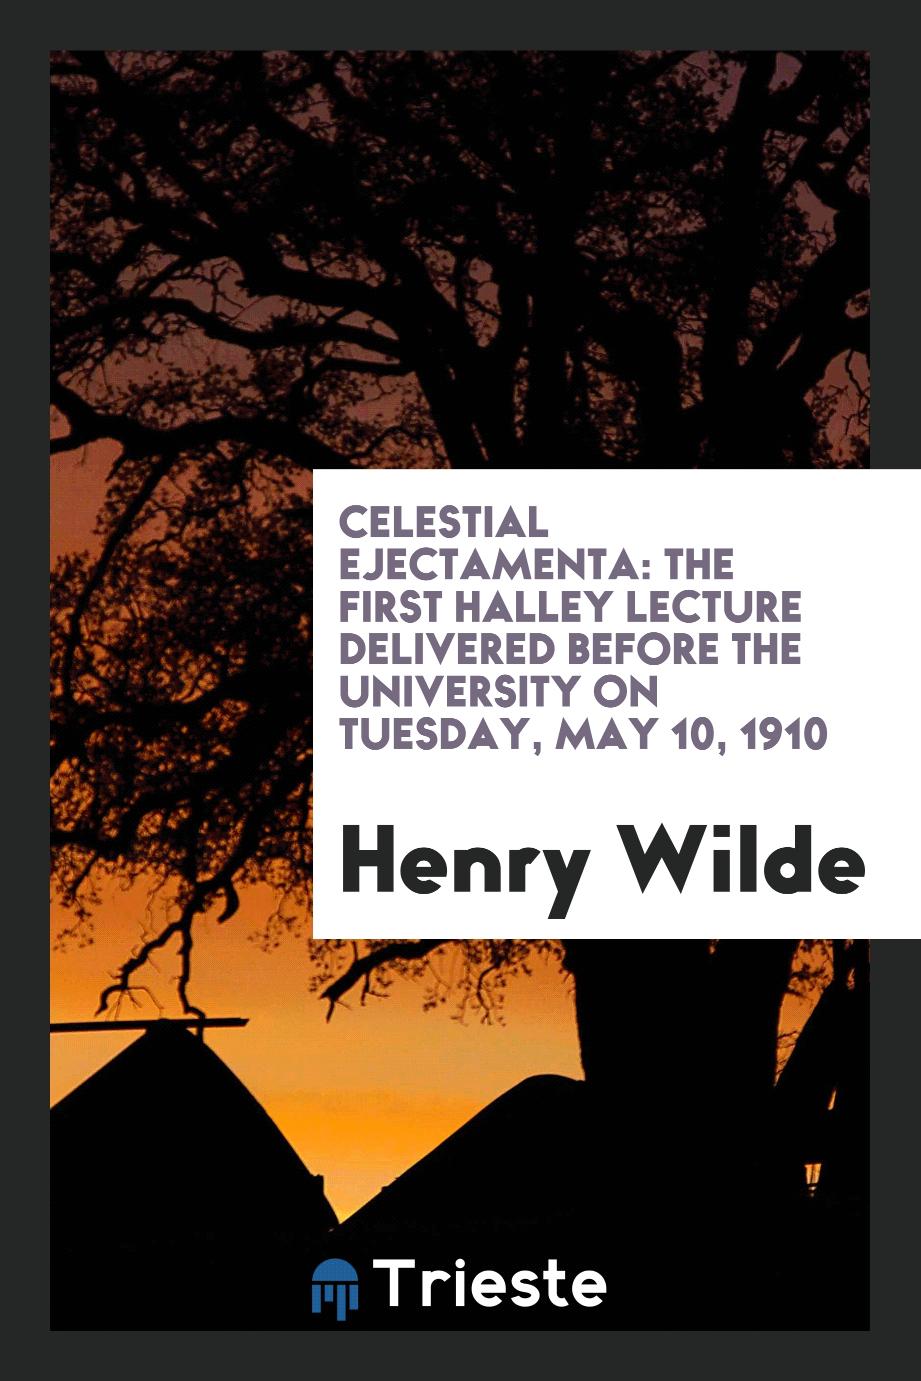 Celestial Ejectamenta: The First Halley Lecture Delivered Before the University on tuesday, may 10, 1910